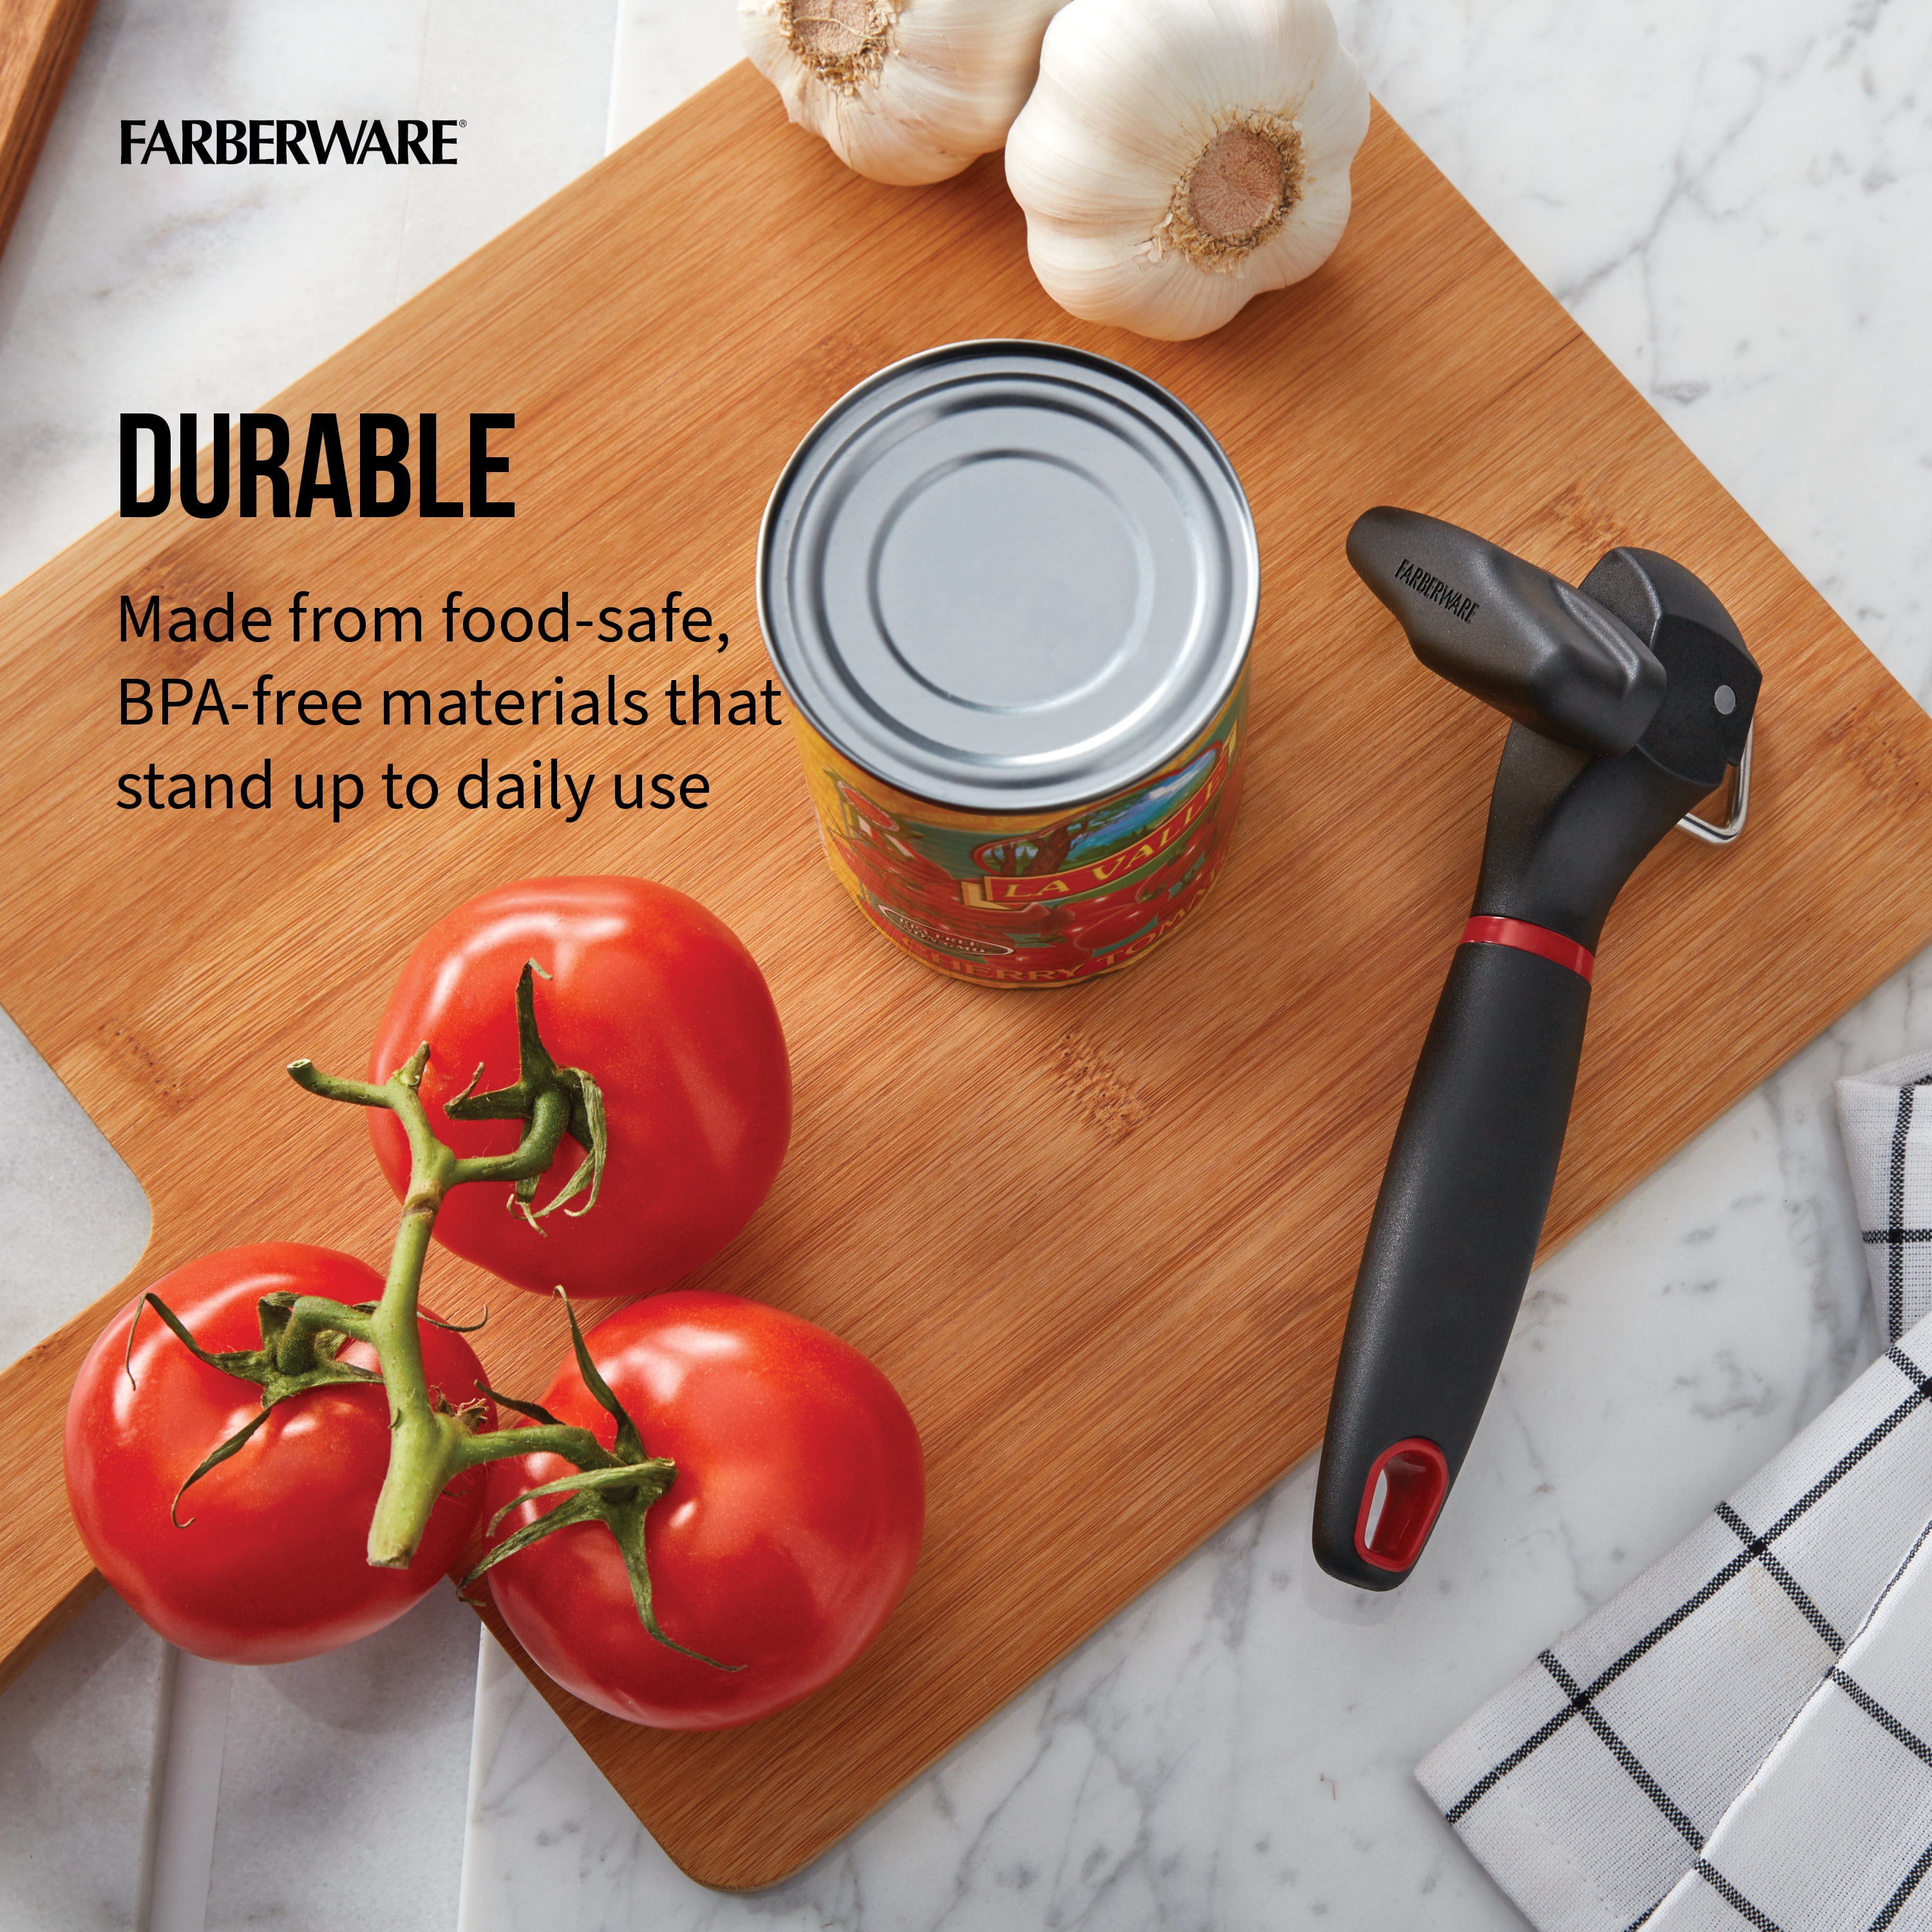 Farberware Soft Grips Manual Can Opener, One Size, Black/Red